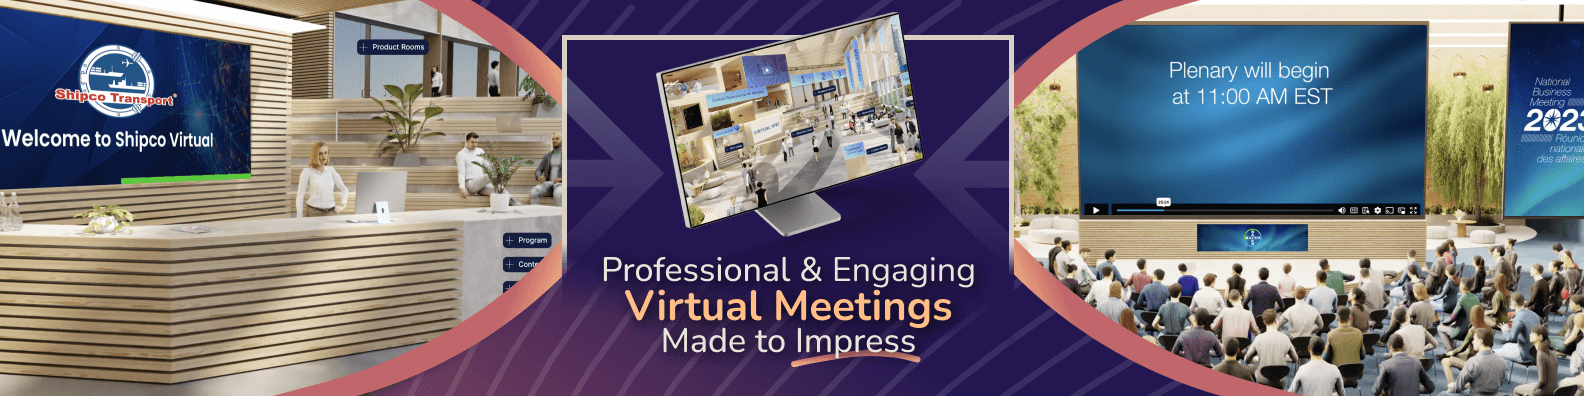 LinkedIn Private Cover Photo_ Professional & Engaging Virtual Meetings Made to Impress with branding-1